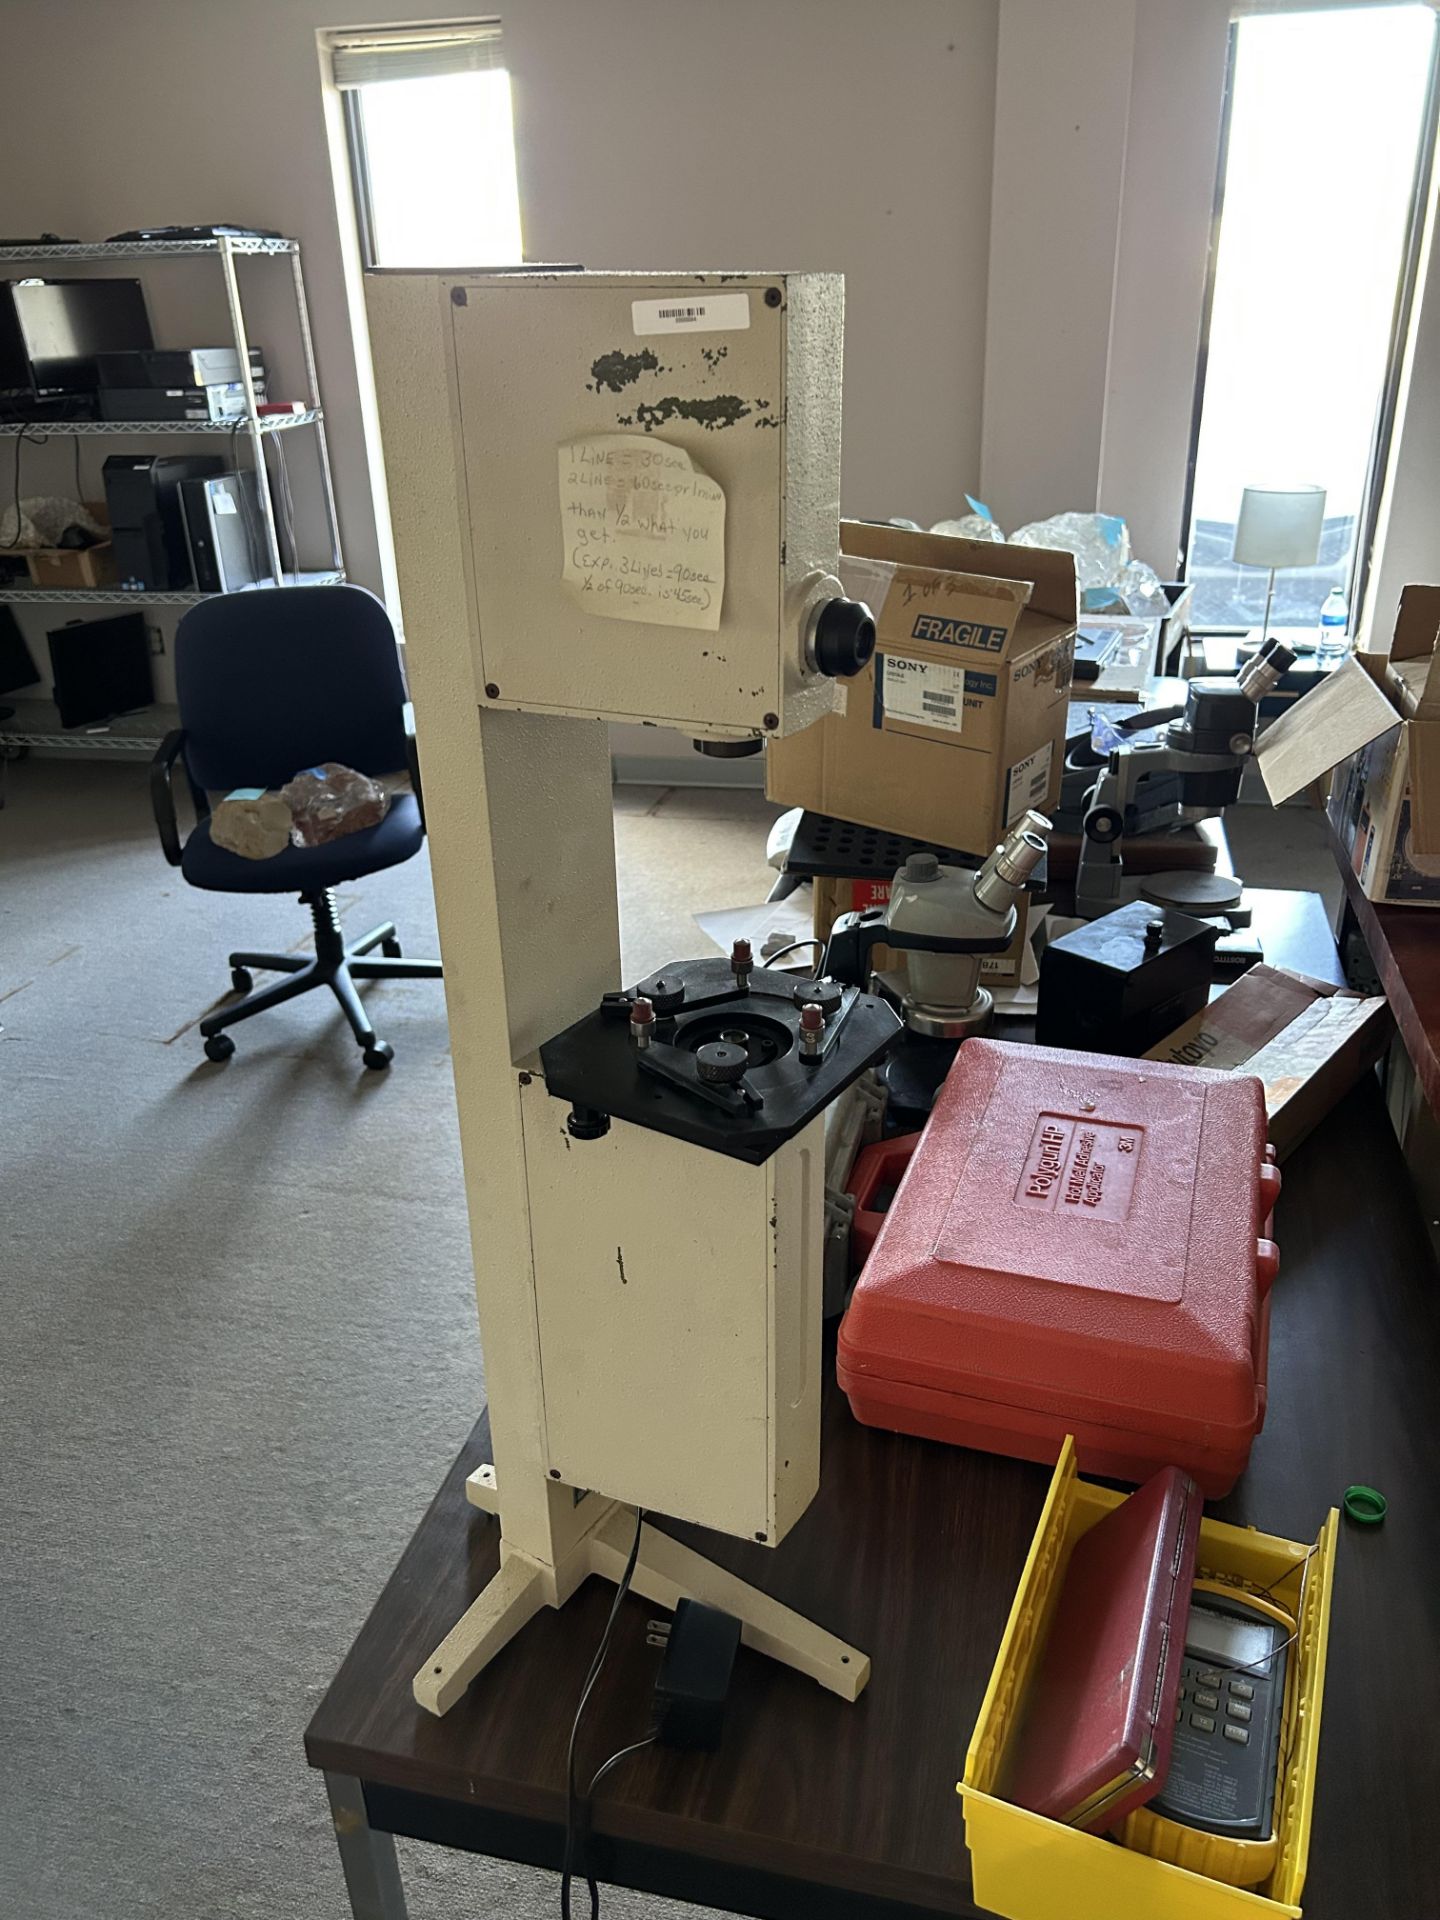 Entire Table of Calibration Type Equipment - Image 15 of 16